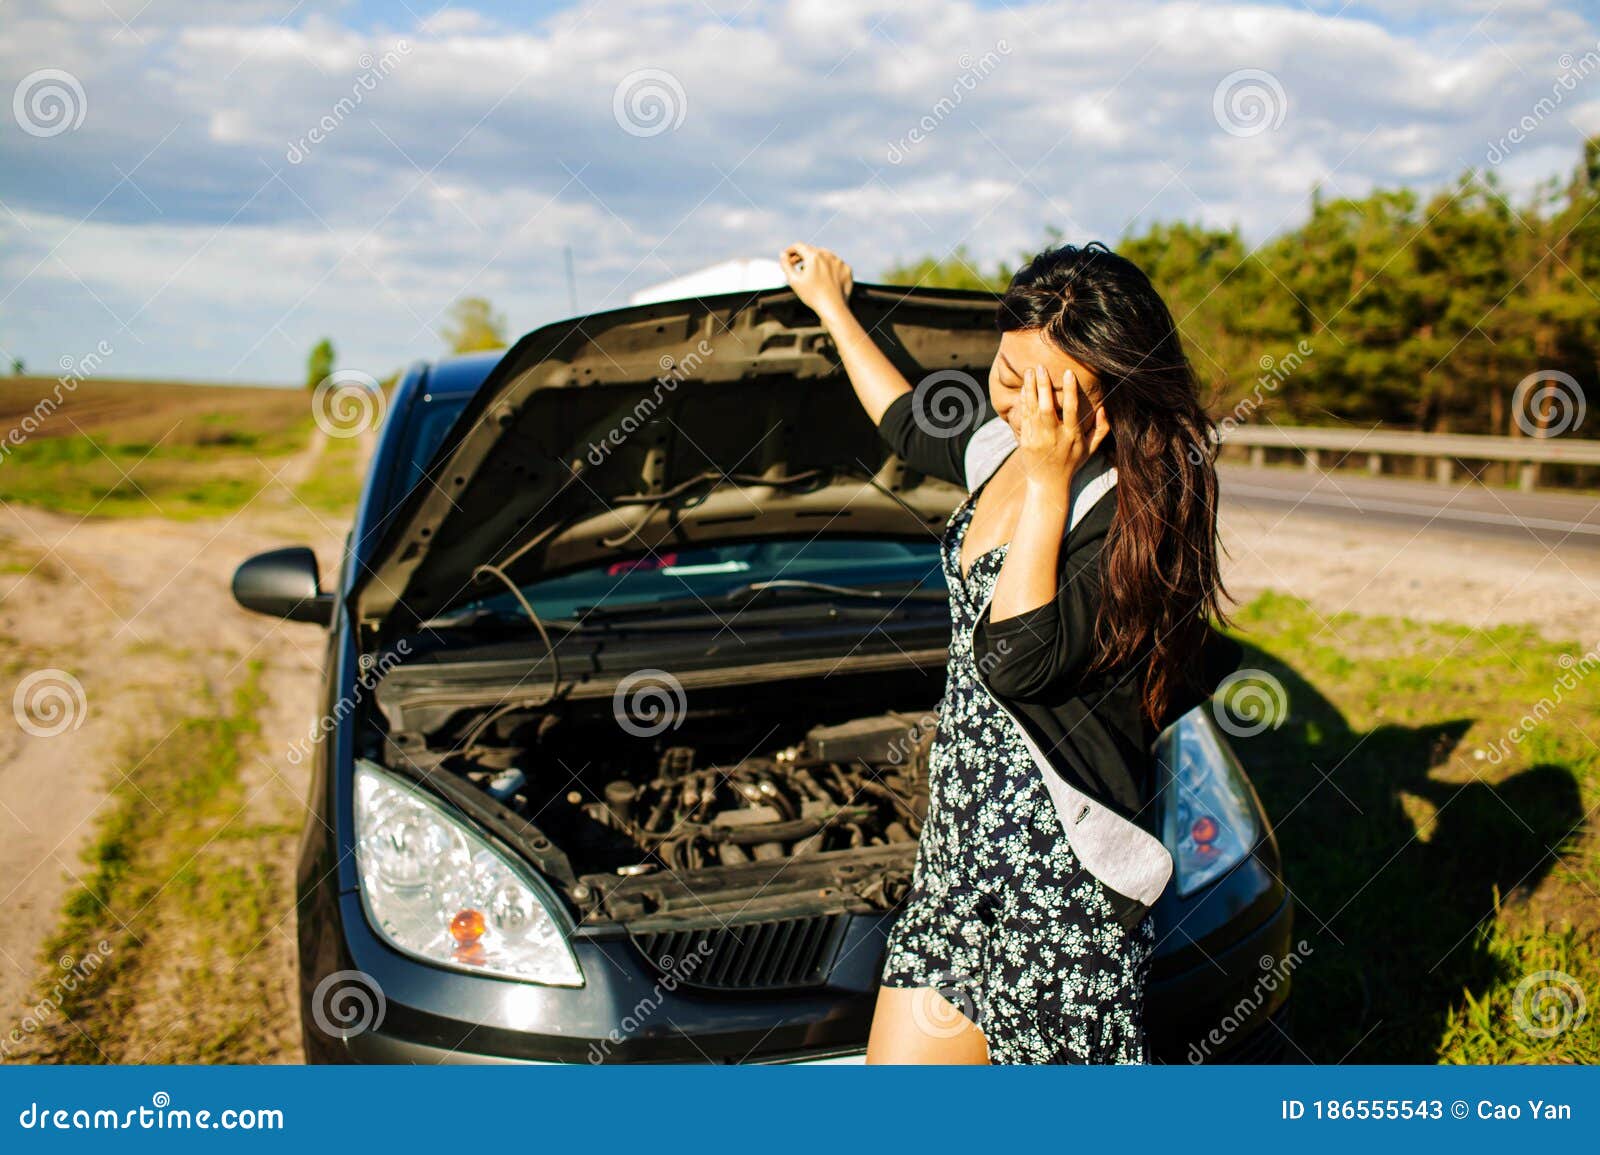 Woman Having Car Trouble And Using Cell Phone To Call For Help Stock